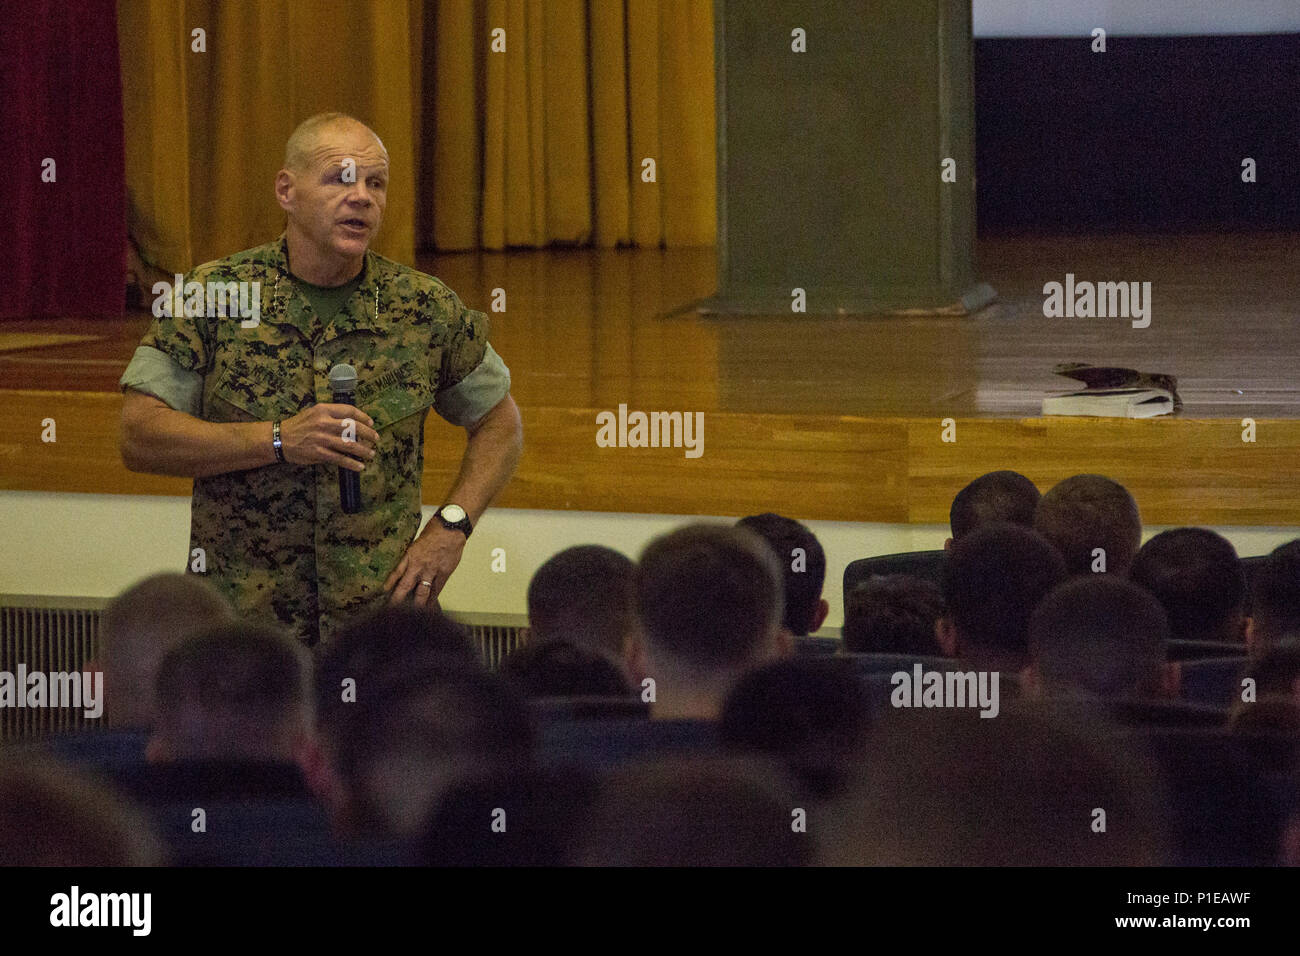 Commandant of the Marine Corps Gen. Robert B. Neller speaks to Marines at Camp Kinser, Okinawa, Japan, Oct. 13, 2016. Neller spoke about leadership expectations, readiness, and the future of the U.S. Marine Corps. (U.S. Marine Corps photo by Cpl. Samantha K. Braun) Stock Photo